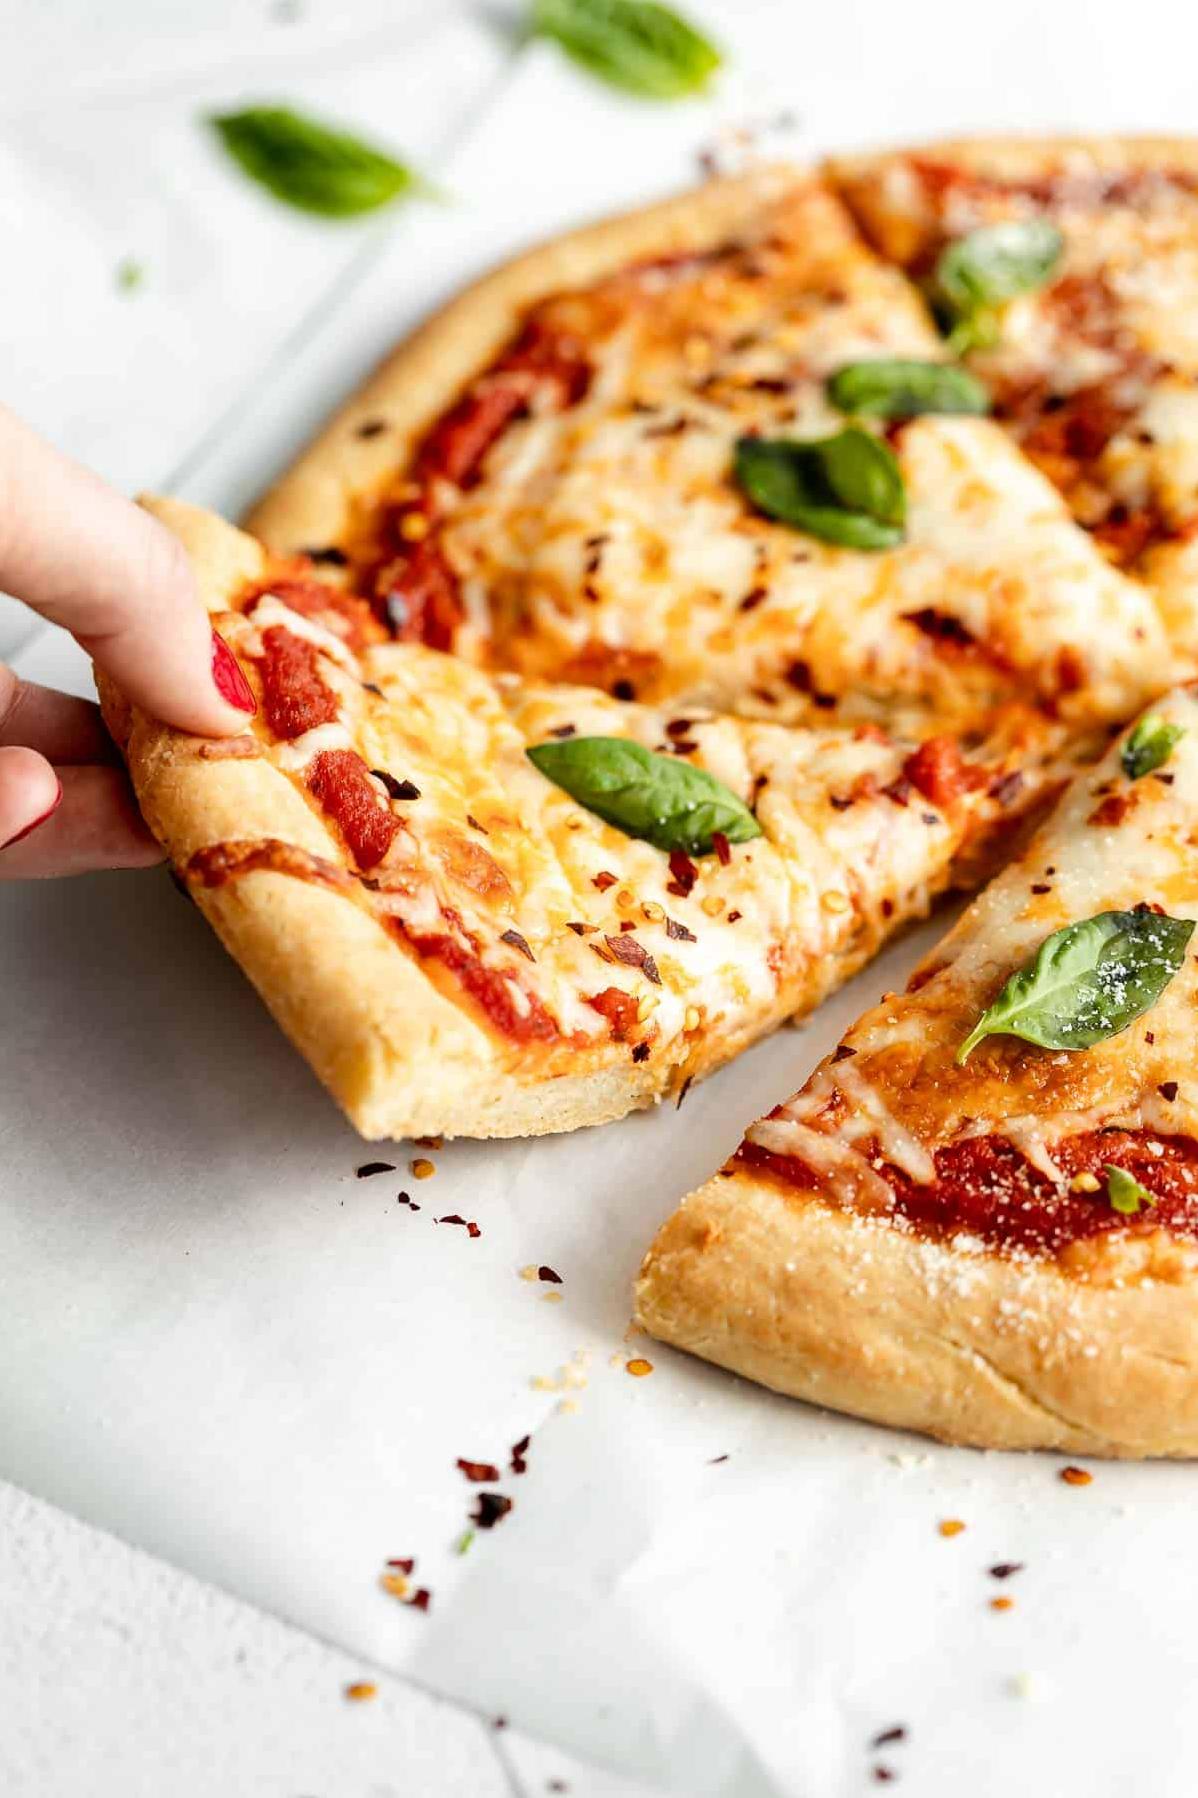  This crust is so good, you won't even realize it's gluten-free!